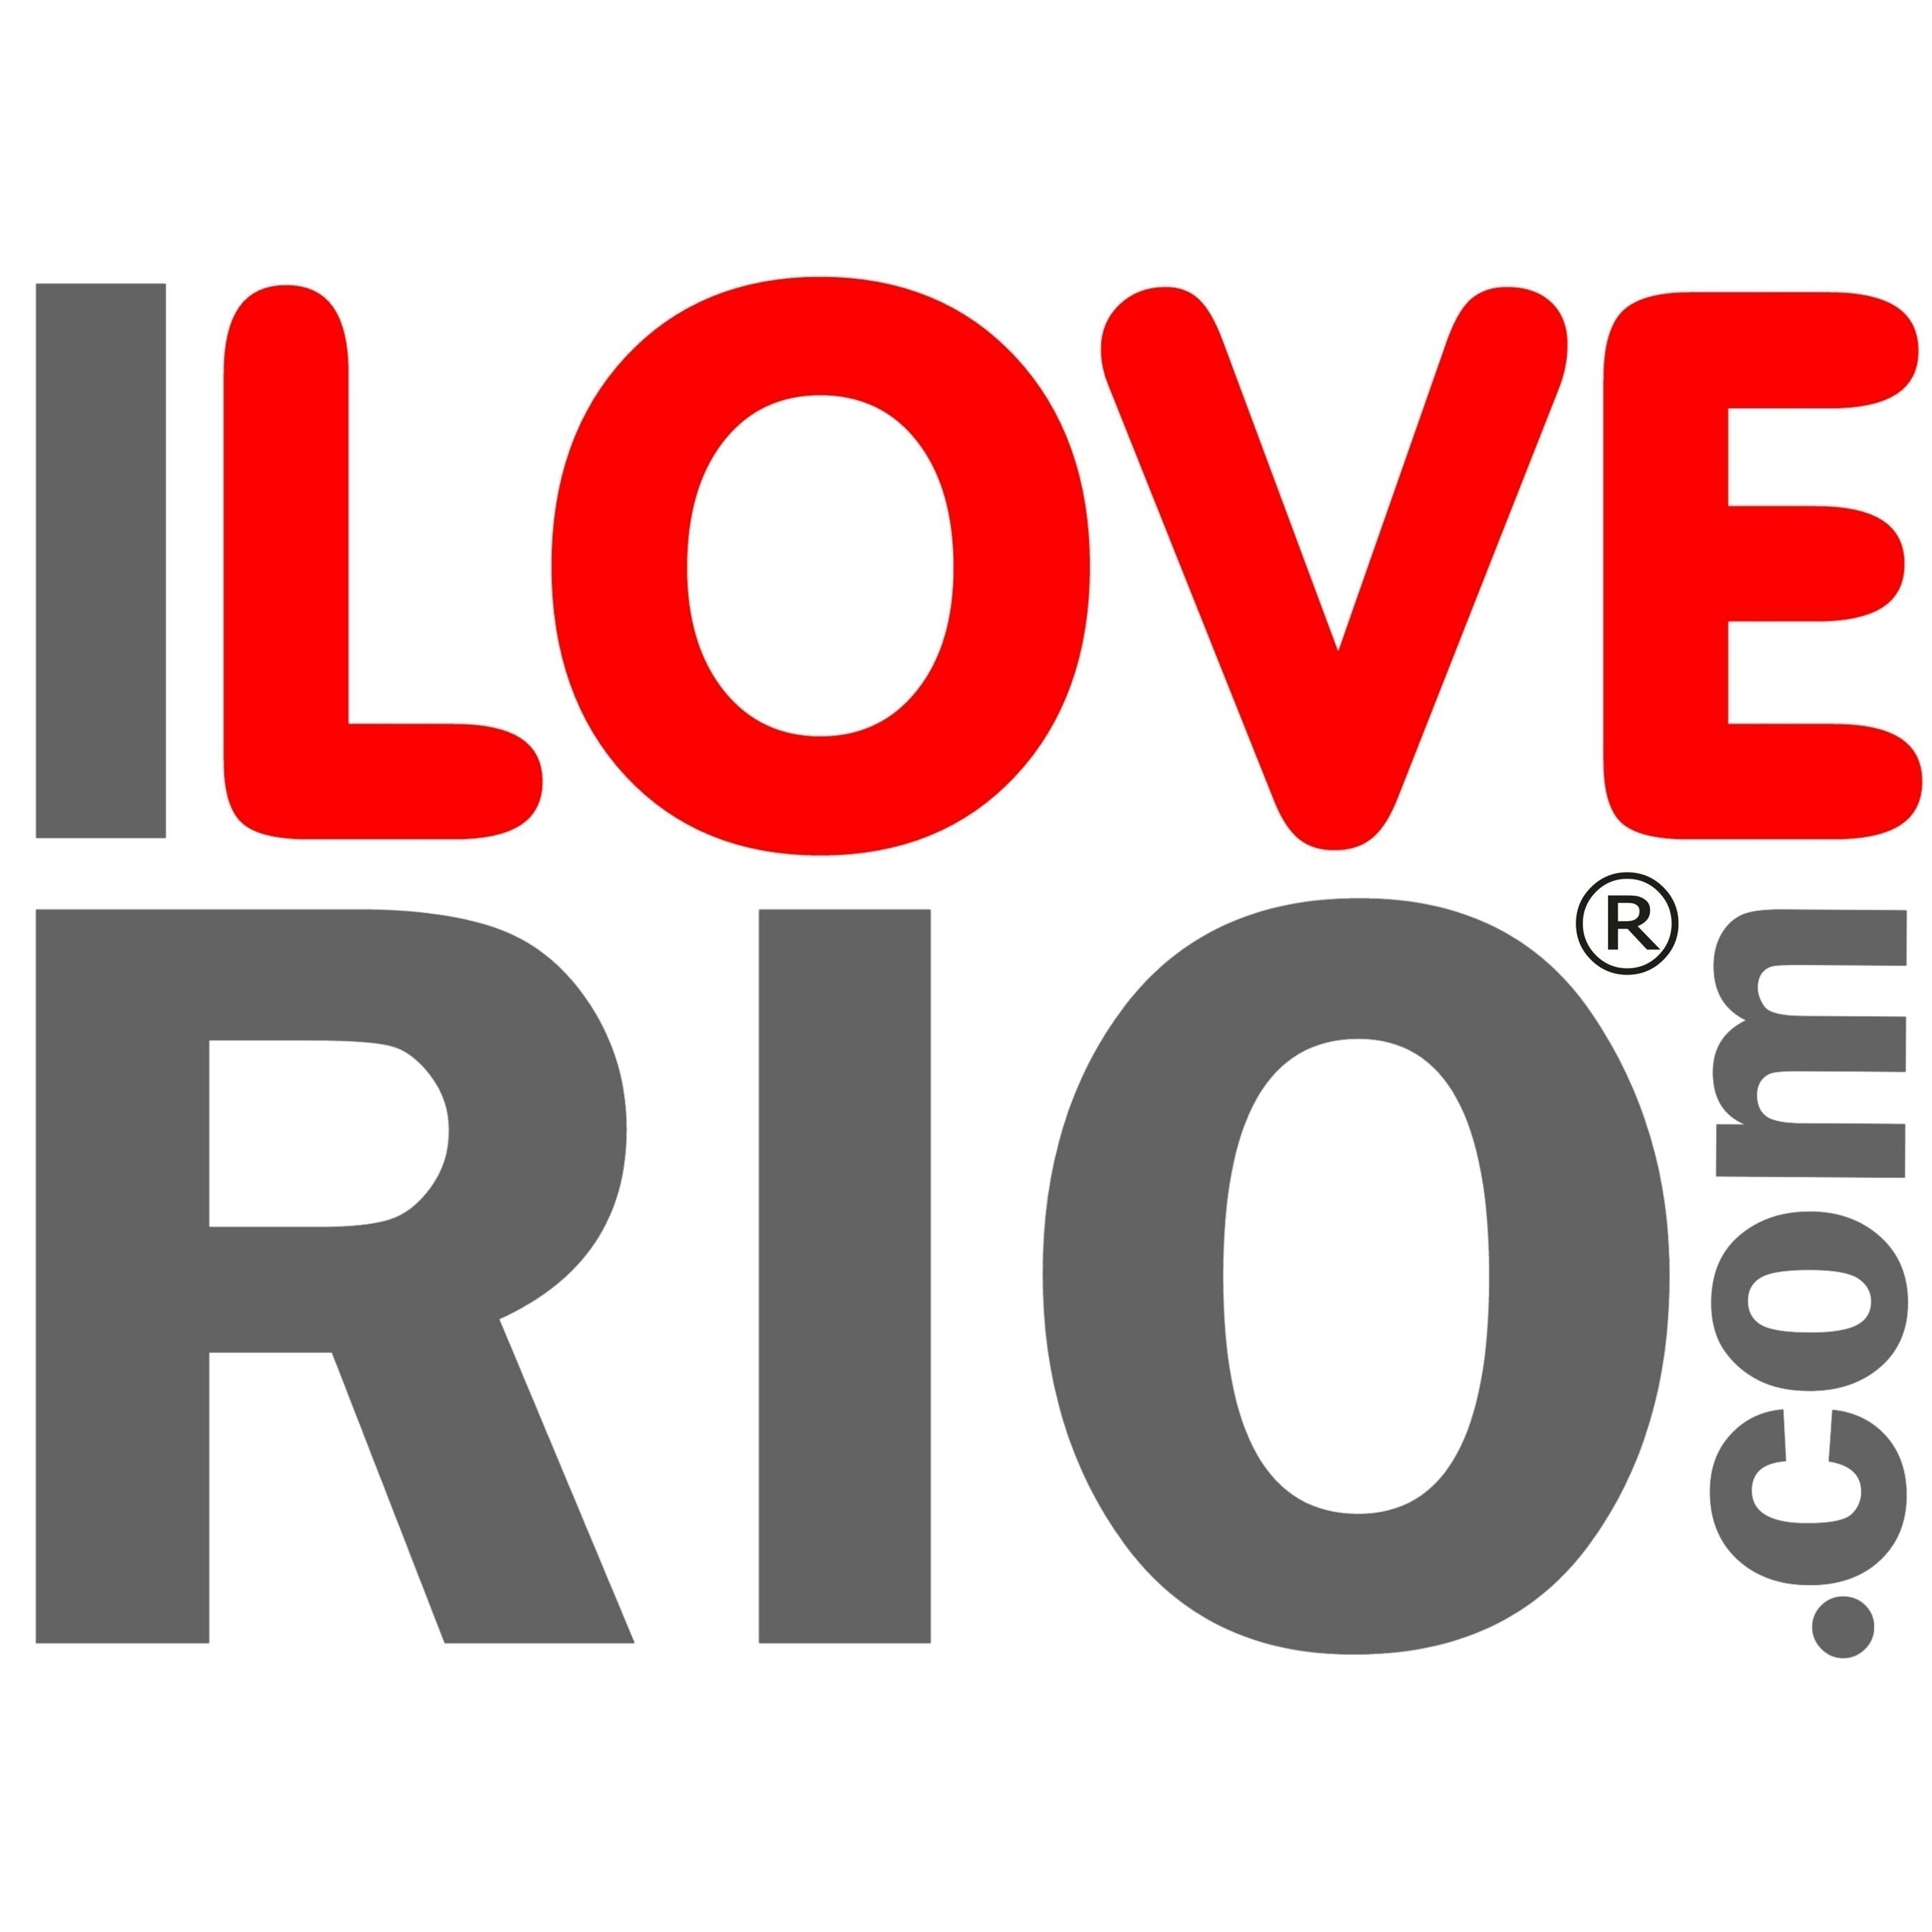 I LOVE RIO is a presentation of Rio de Janeiro with a social, cultural and historical interpretation of all the aspects that make the city the beautiful and unique gem that it is today. Designed for both quality tourism and in-depth research, the Portal is a virtual stroll along the many corners of Rio that, for a lack of time or opportunity, cannot be directly experienced by the majority of visitors, allowing them to discover hidden dimensions of the city. www.iloverio.com